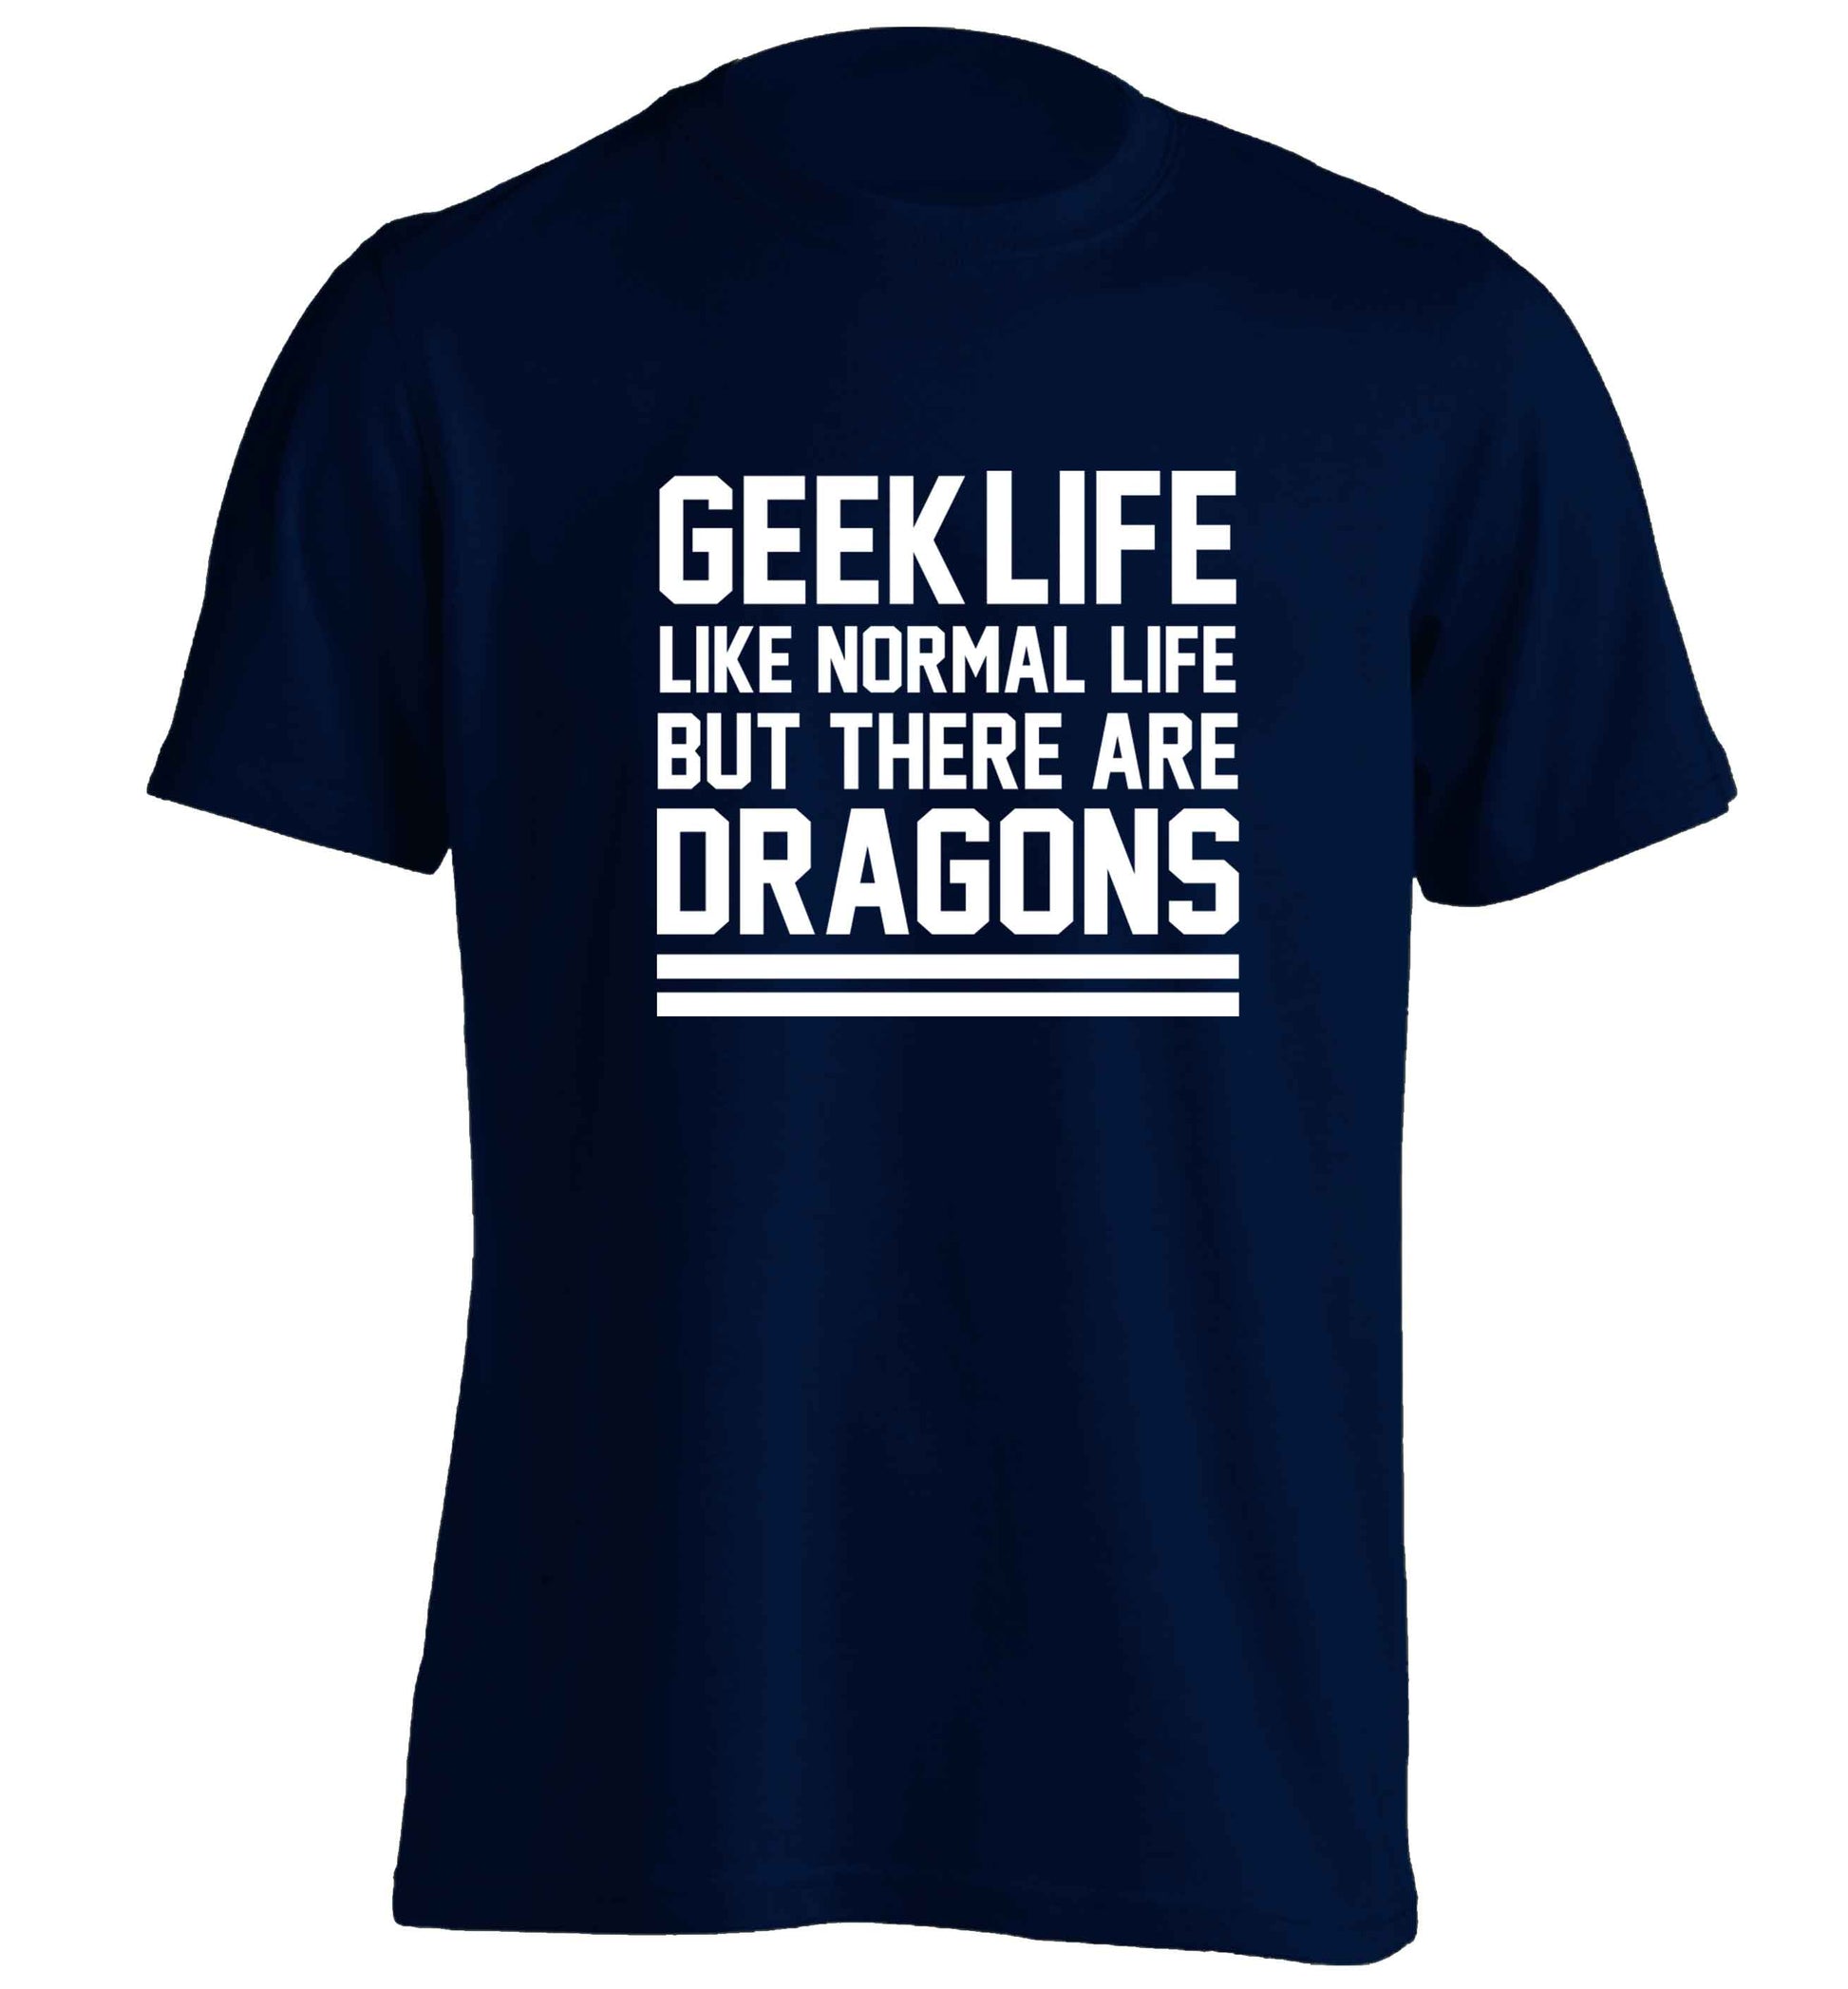 Geek life like normal life but there are dragons adults unisex navy Tshirt 2XL